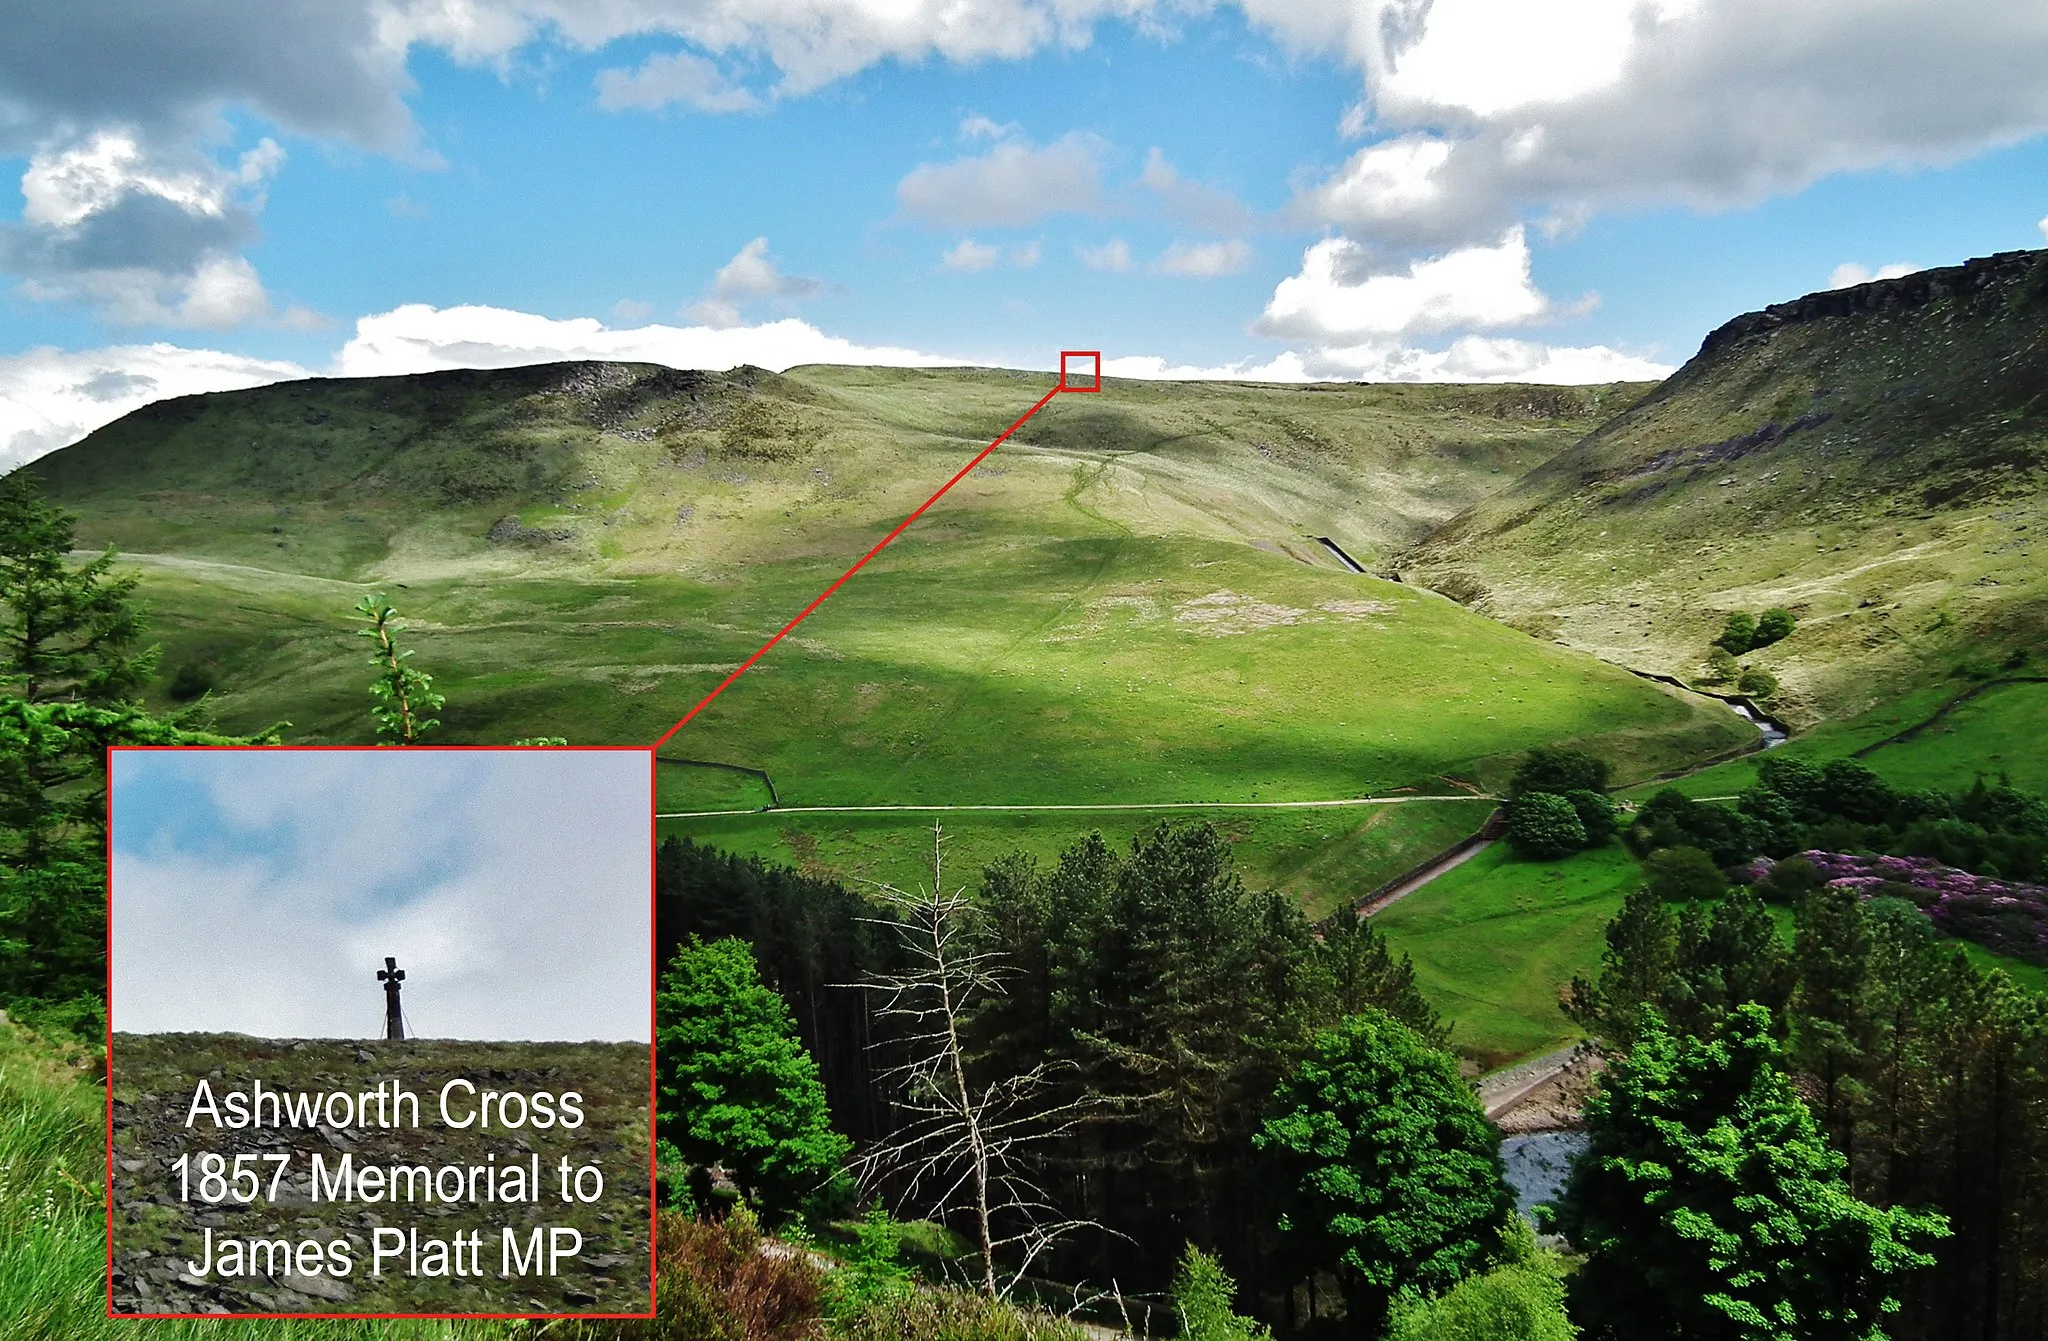 Photo showing: The Ashworth Cross, above the 'Ashway Gap', overlooking Dovestone reservoir
is a memorial to James Platt, the MP for Oldham, who "was killed there by an accidental discharge of his own gun" in 1857.